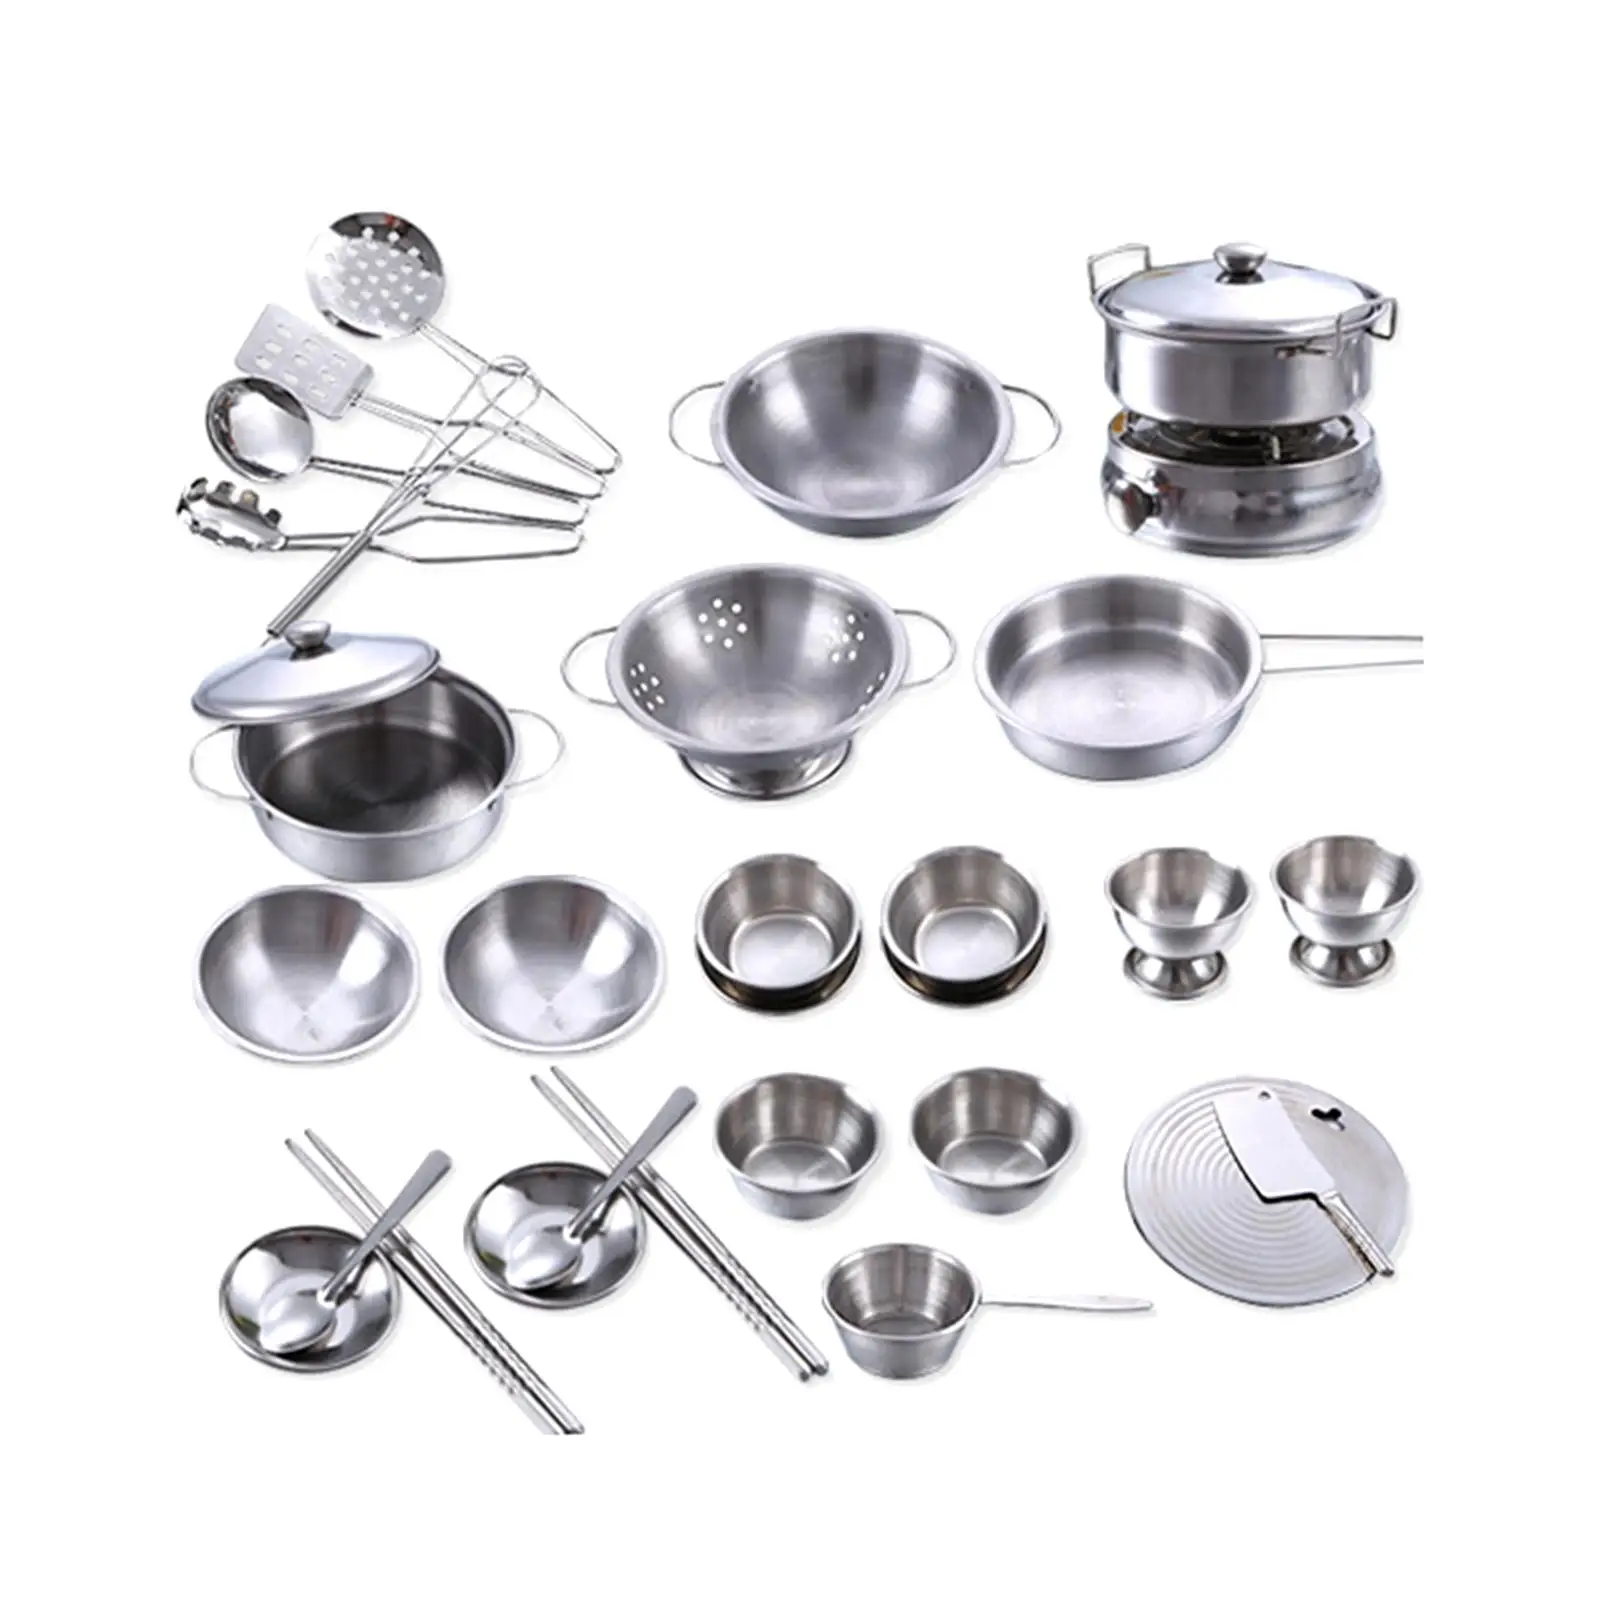 25Pcs Kitchen Pretend Toys Cooking Utensils Stainless Steel Food Grade